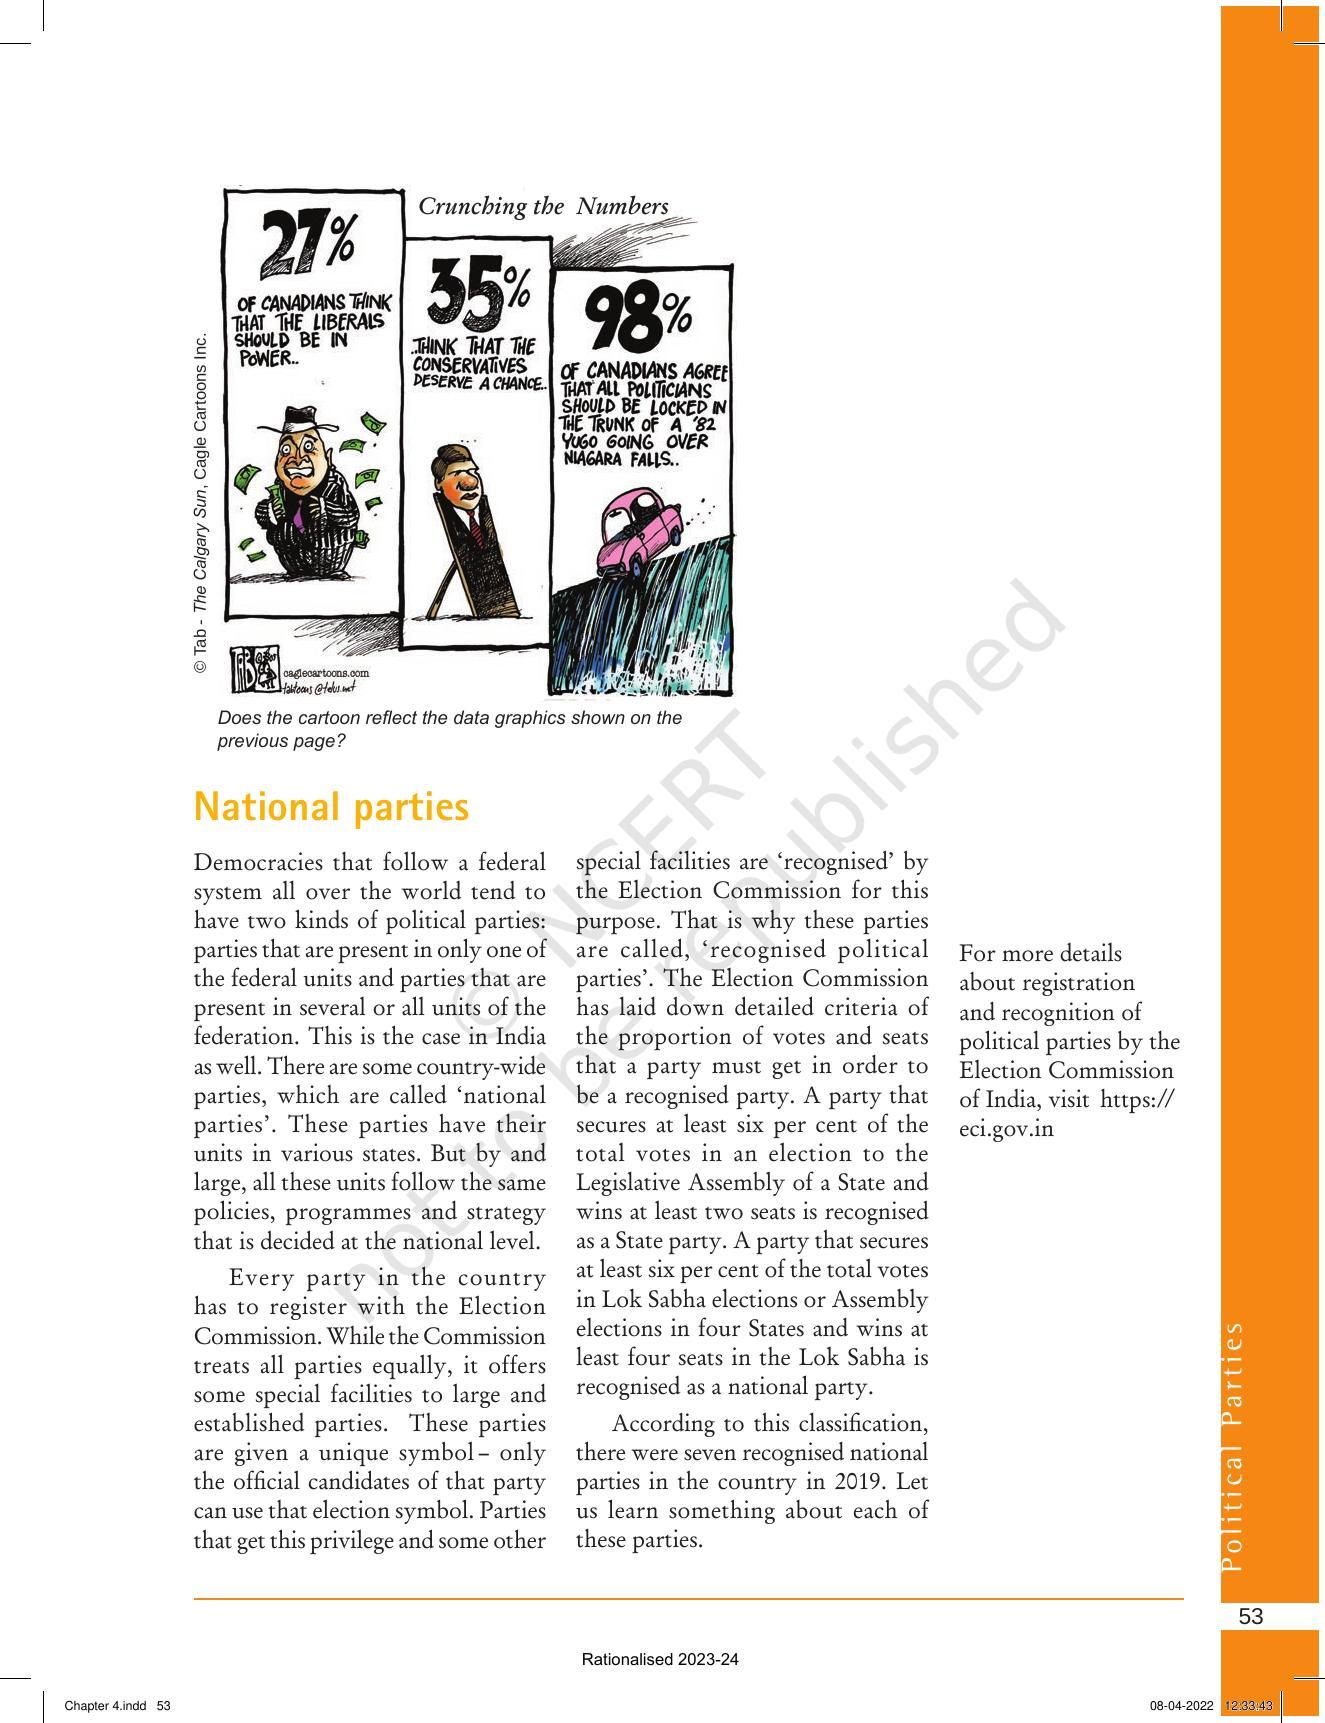 NCERT Book for Class 10 Political Science Chapter 4 Gender, Religion, and Caste - Page 8